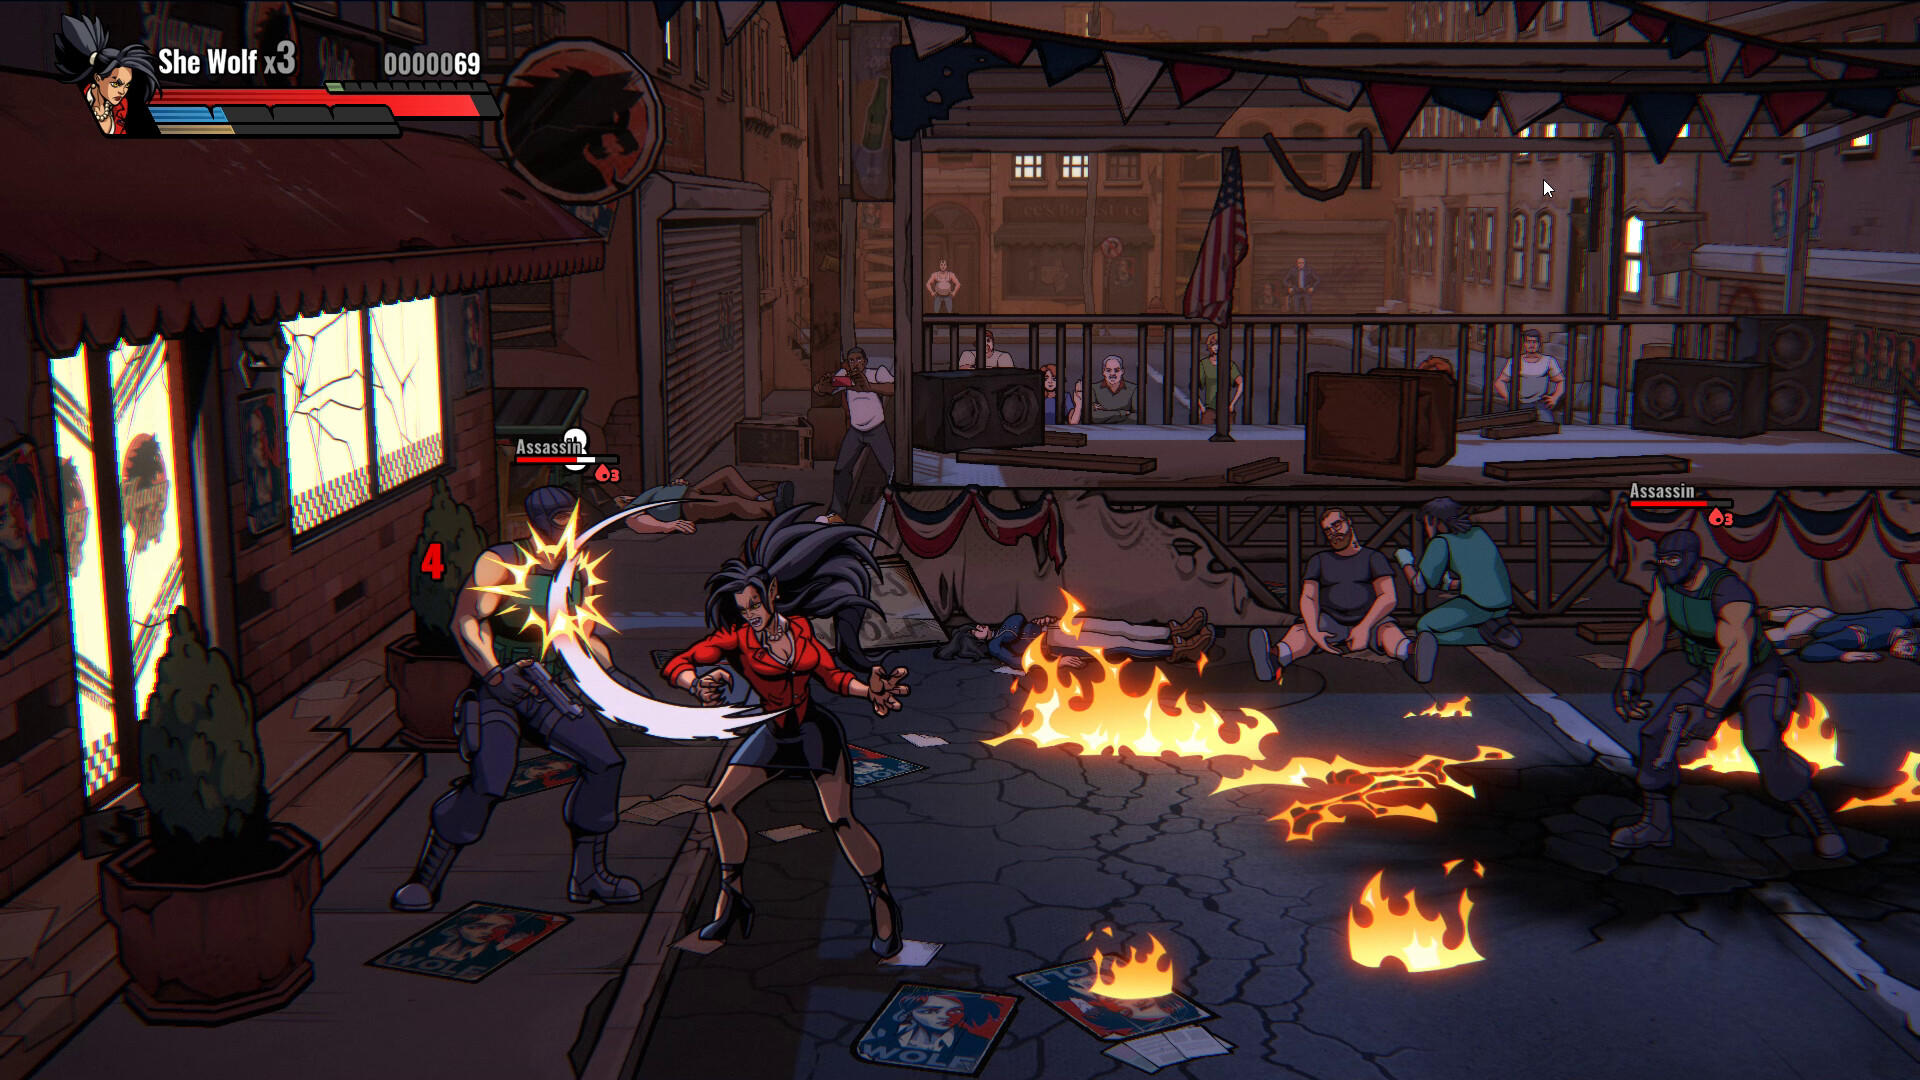 An excellent mobile brawler, with RPG elements